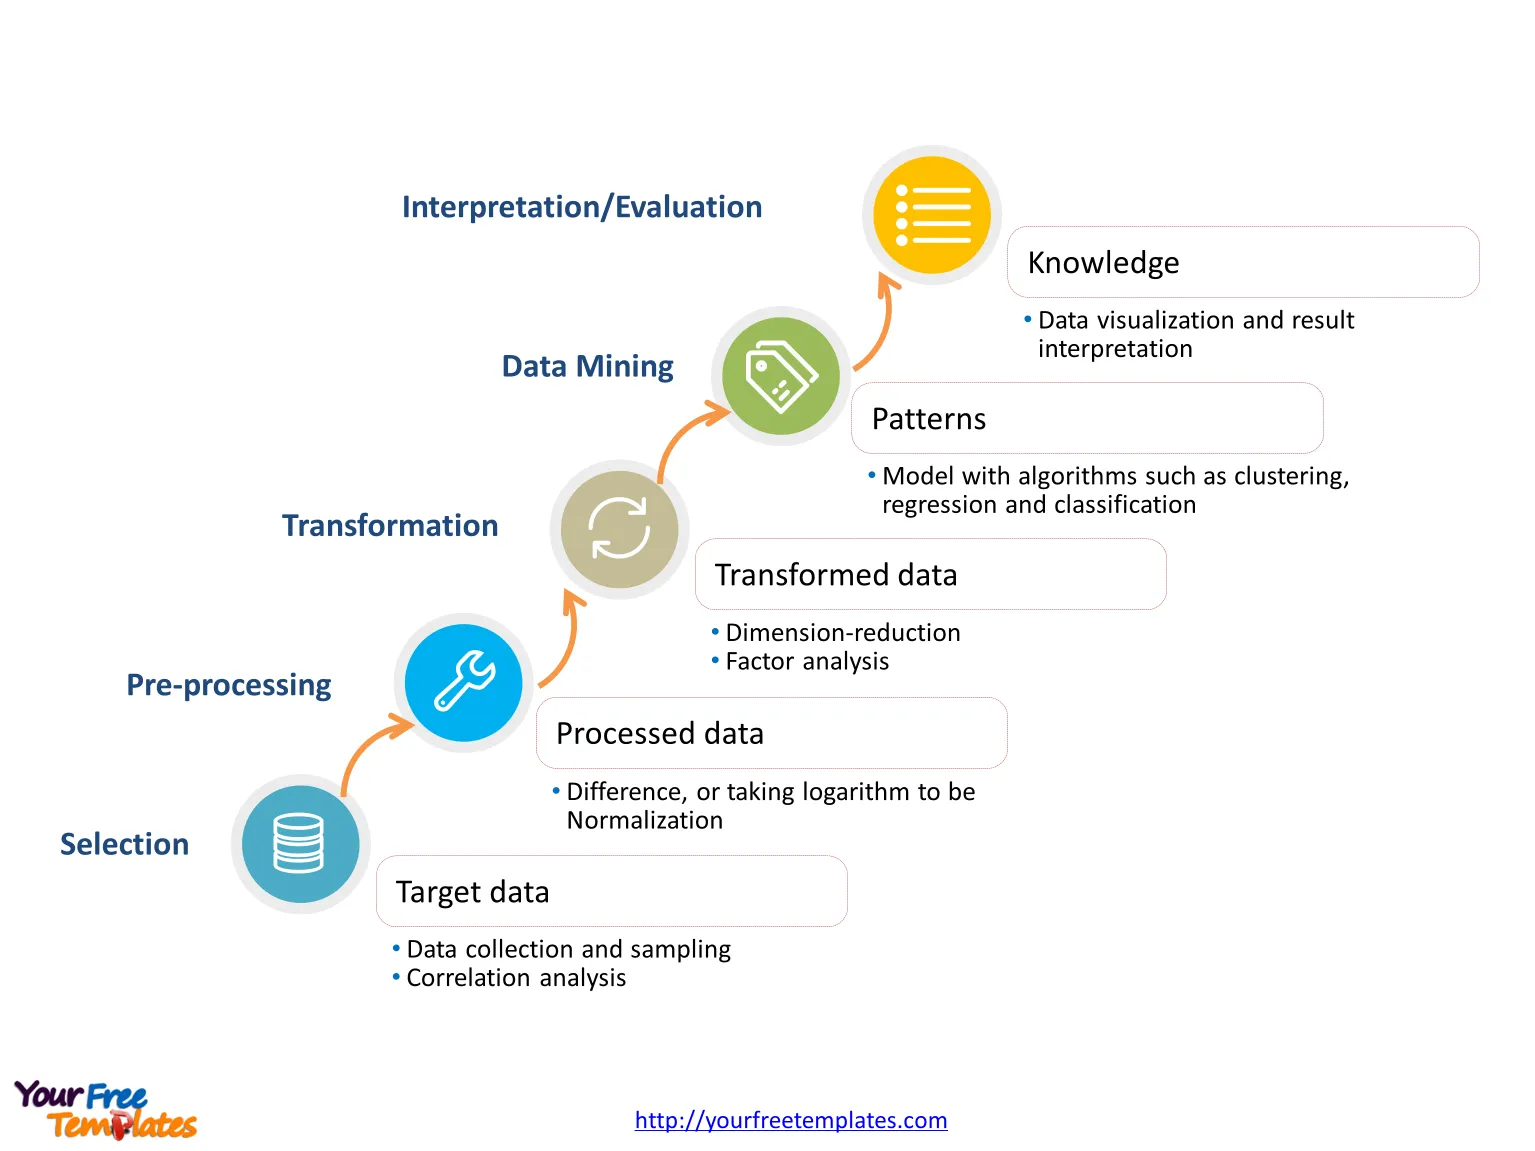 Cross Industry Standard Process for Data Mining with six major phases